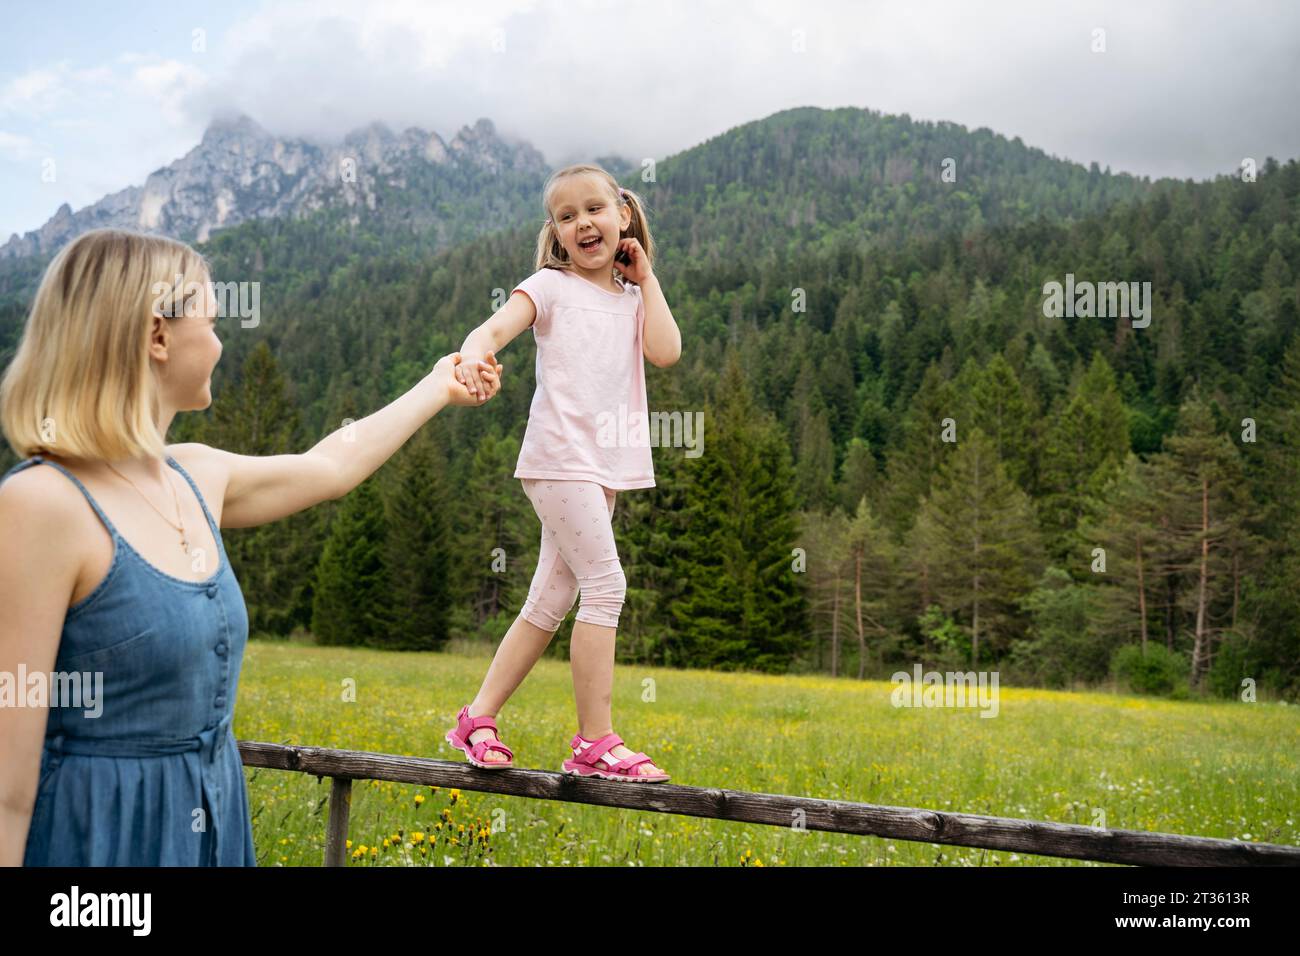 Woman holding daughter's hand walking on railing in front of mountains Stock Photo